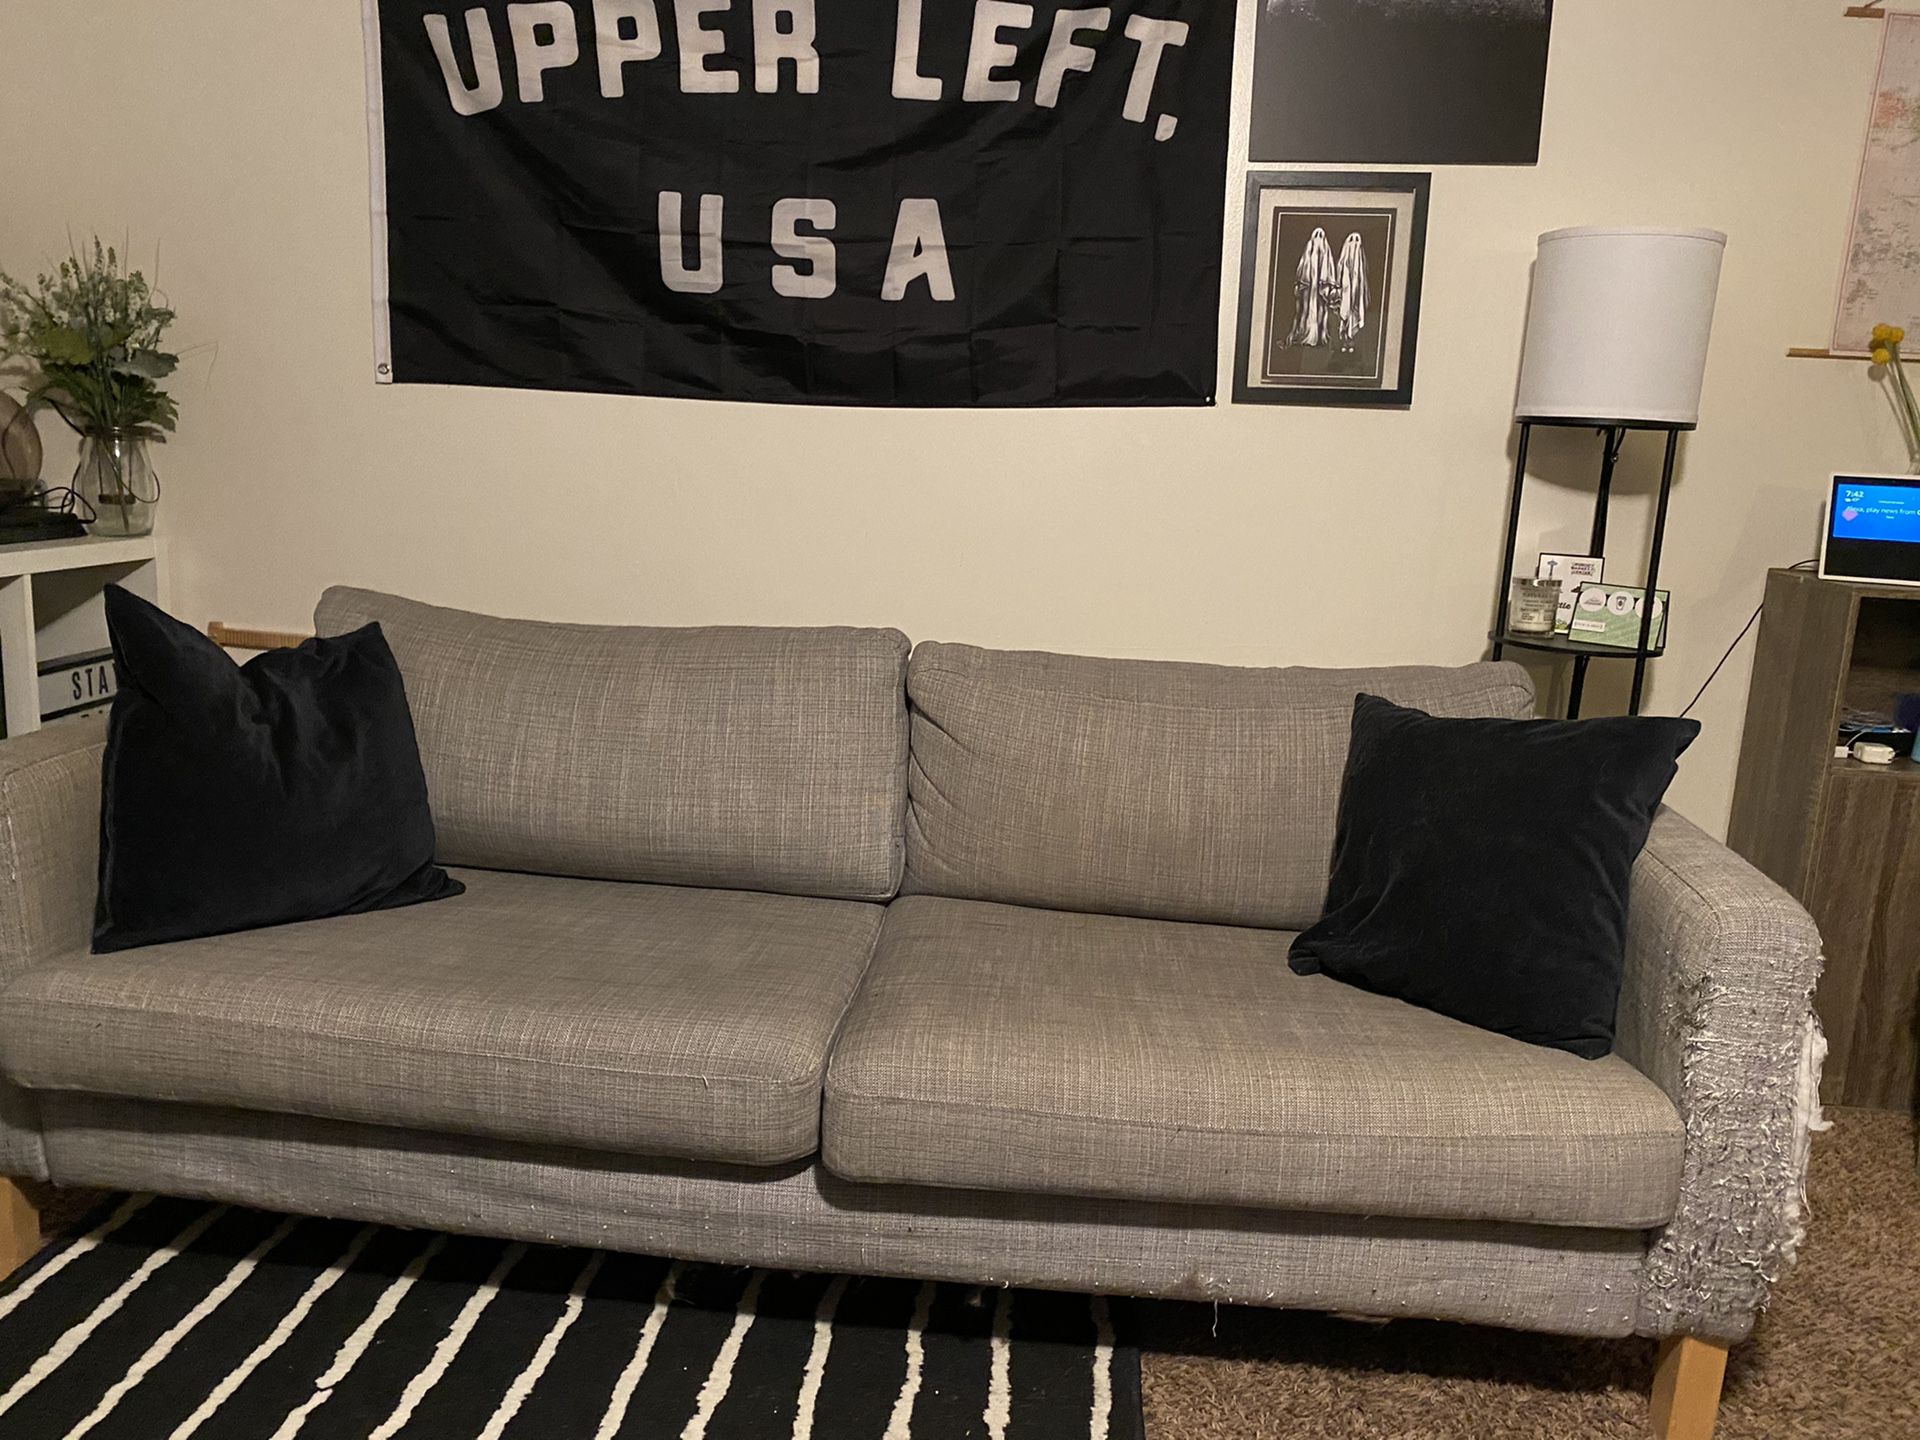 Free Karlstad IKEA couch!